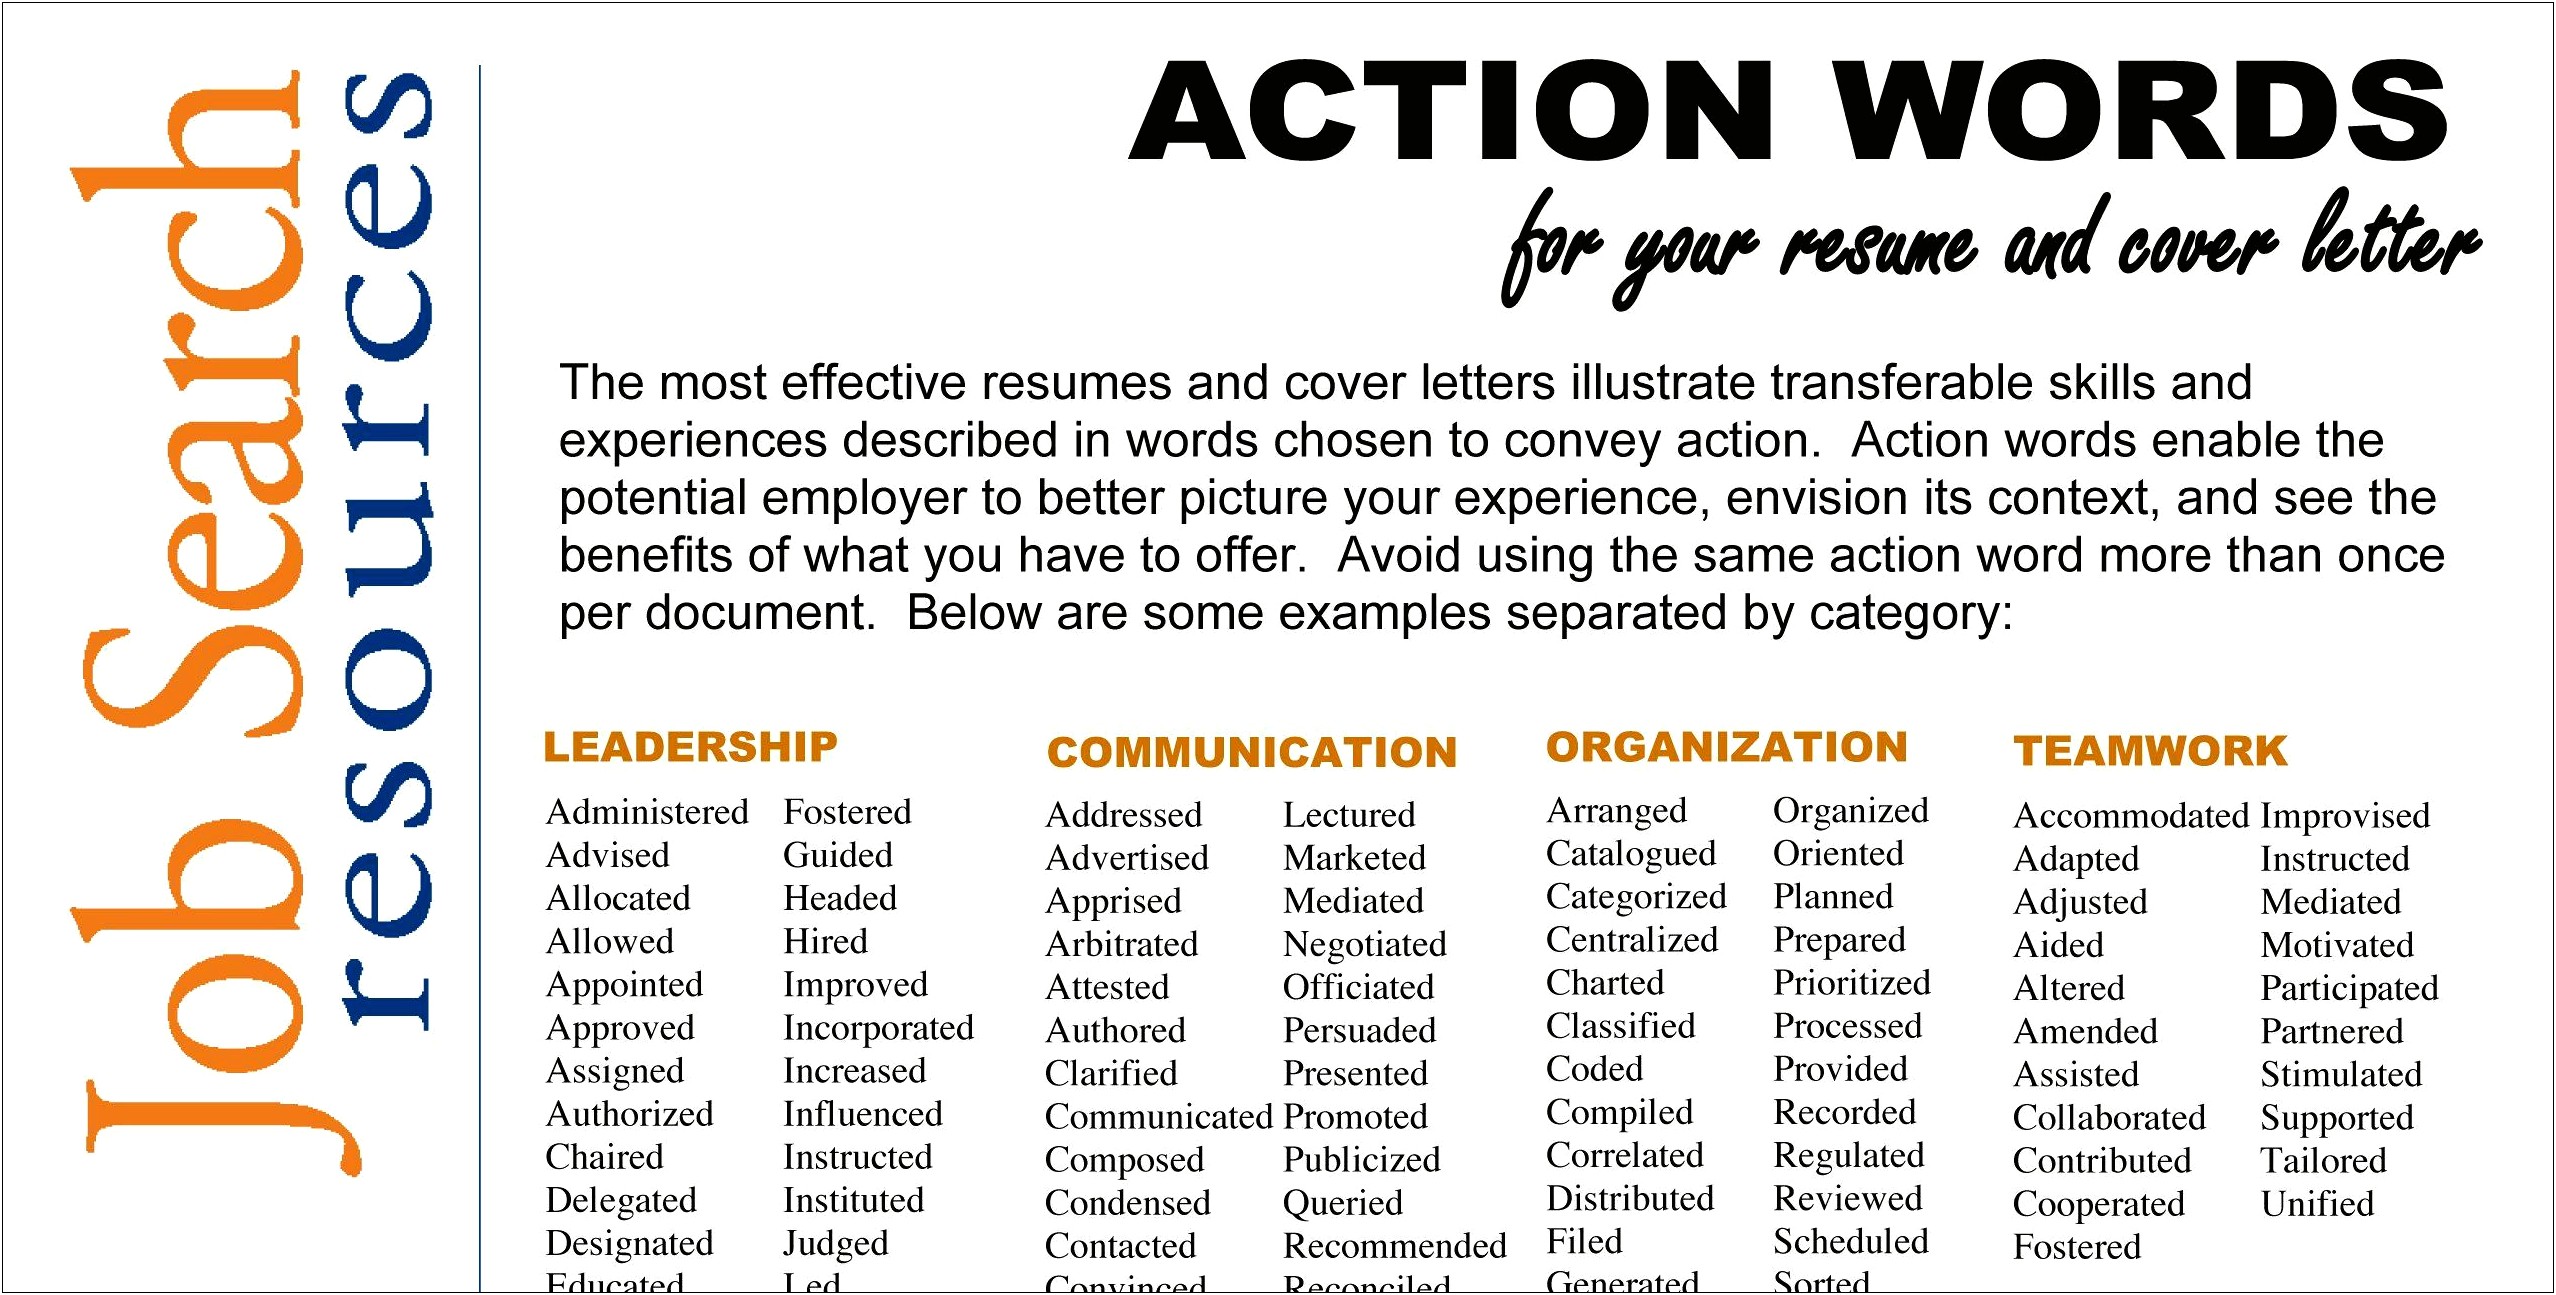 Action Based Skills For A Resume